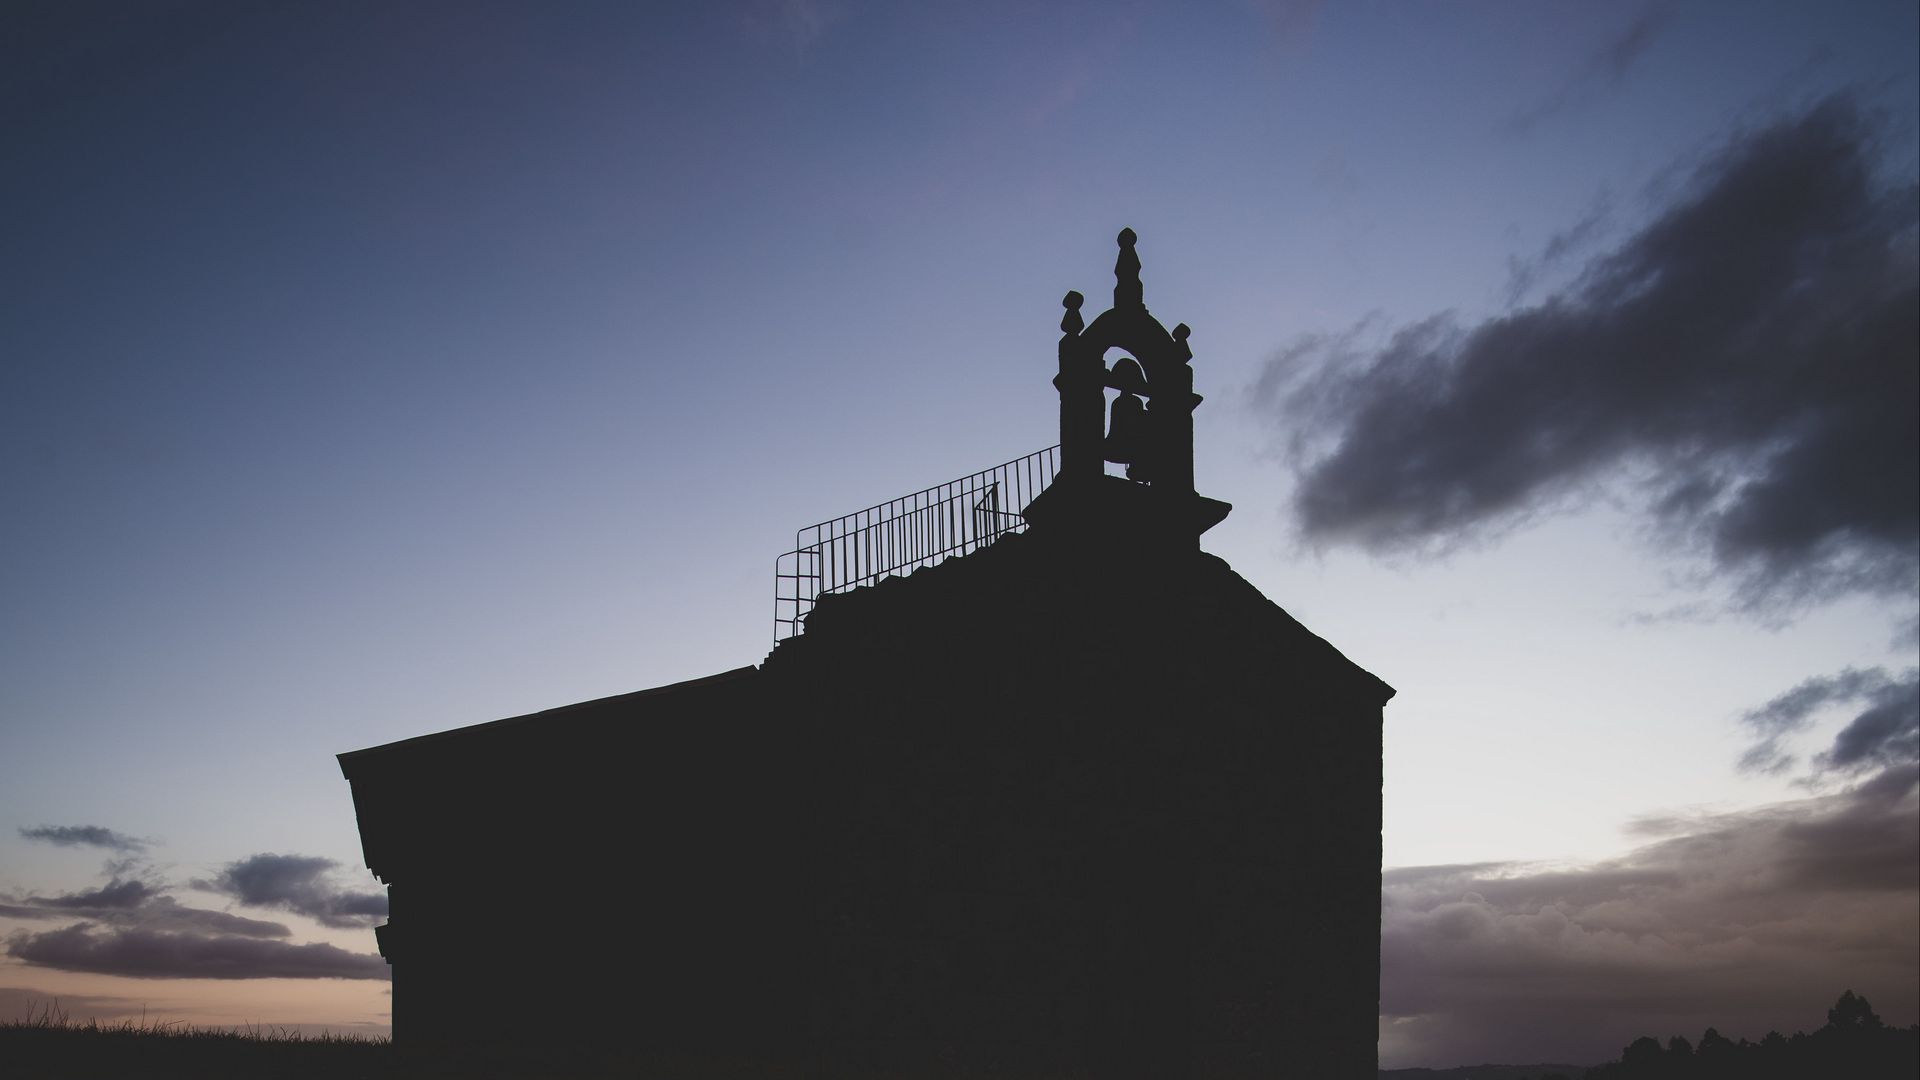 Download wallpaper 1920x1080 bell tower, buildings, silhouette, evening ...